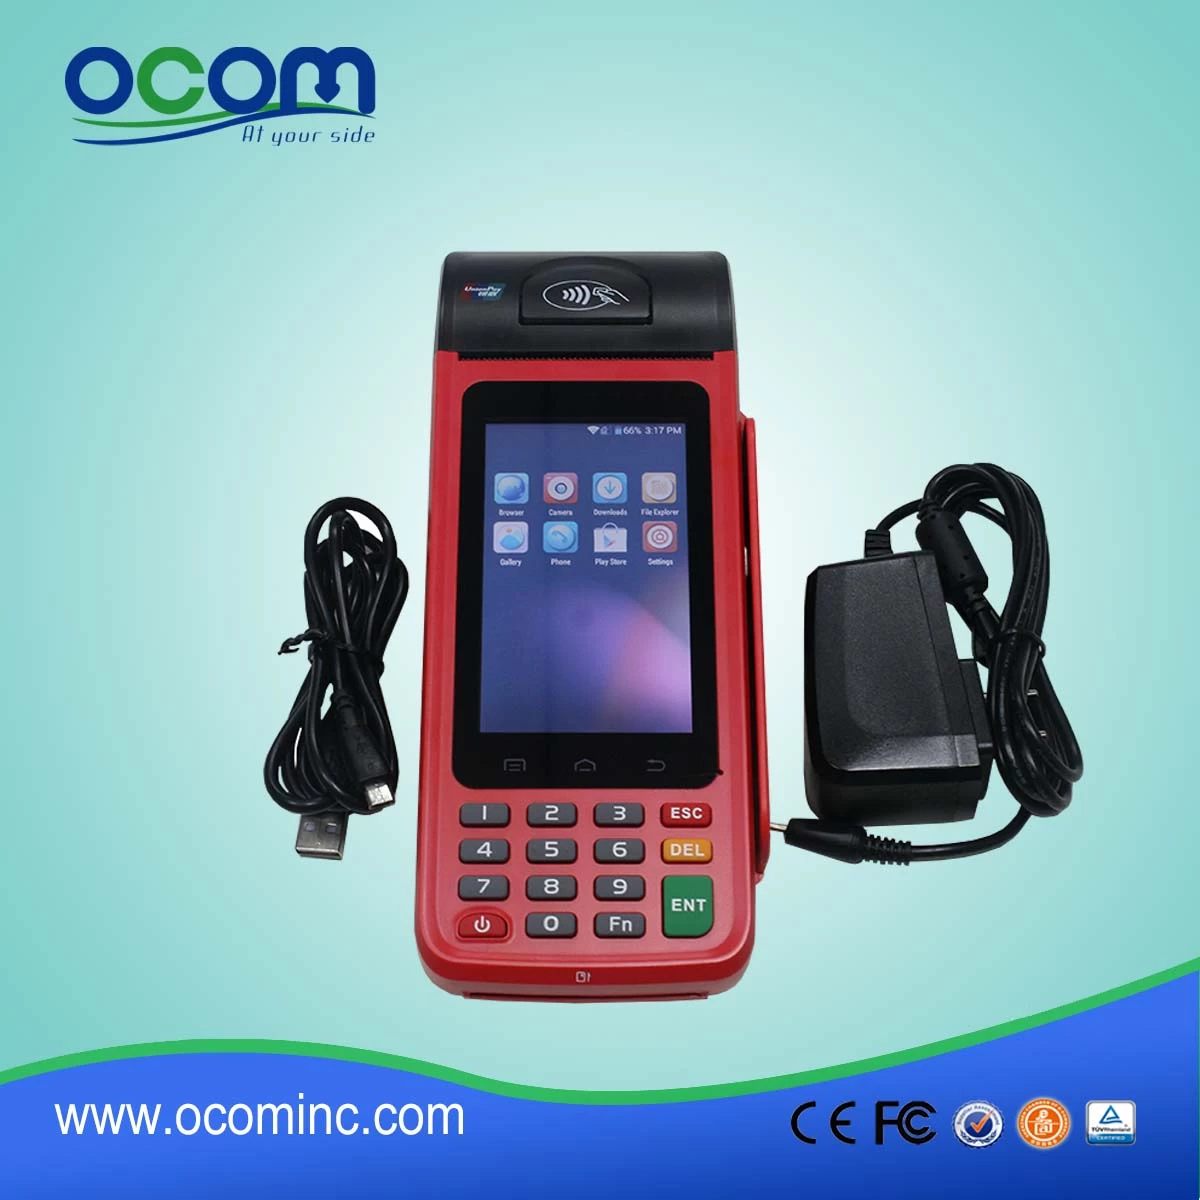 P8000 Handheld Electric pos with Striped Card Reader Wireless